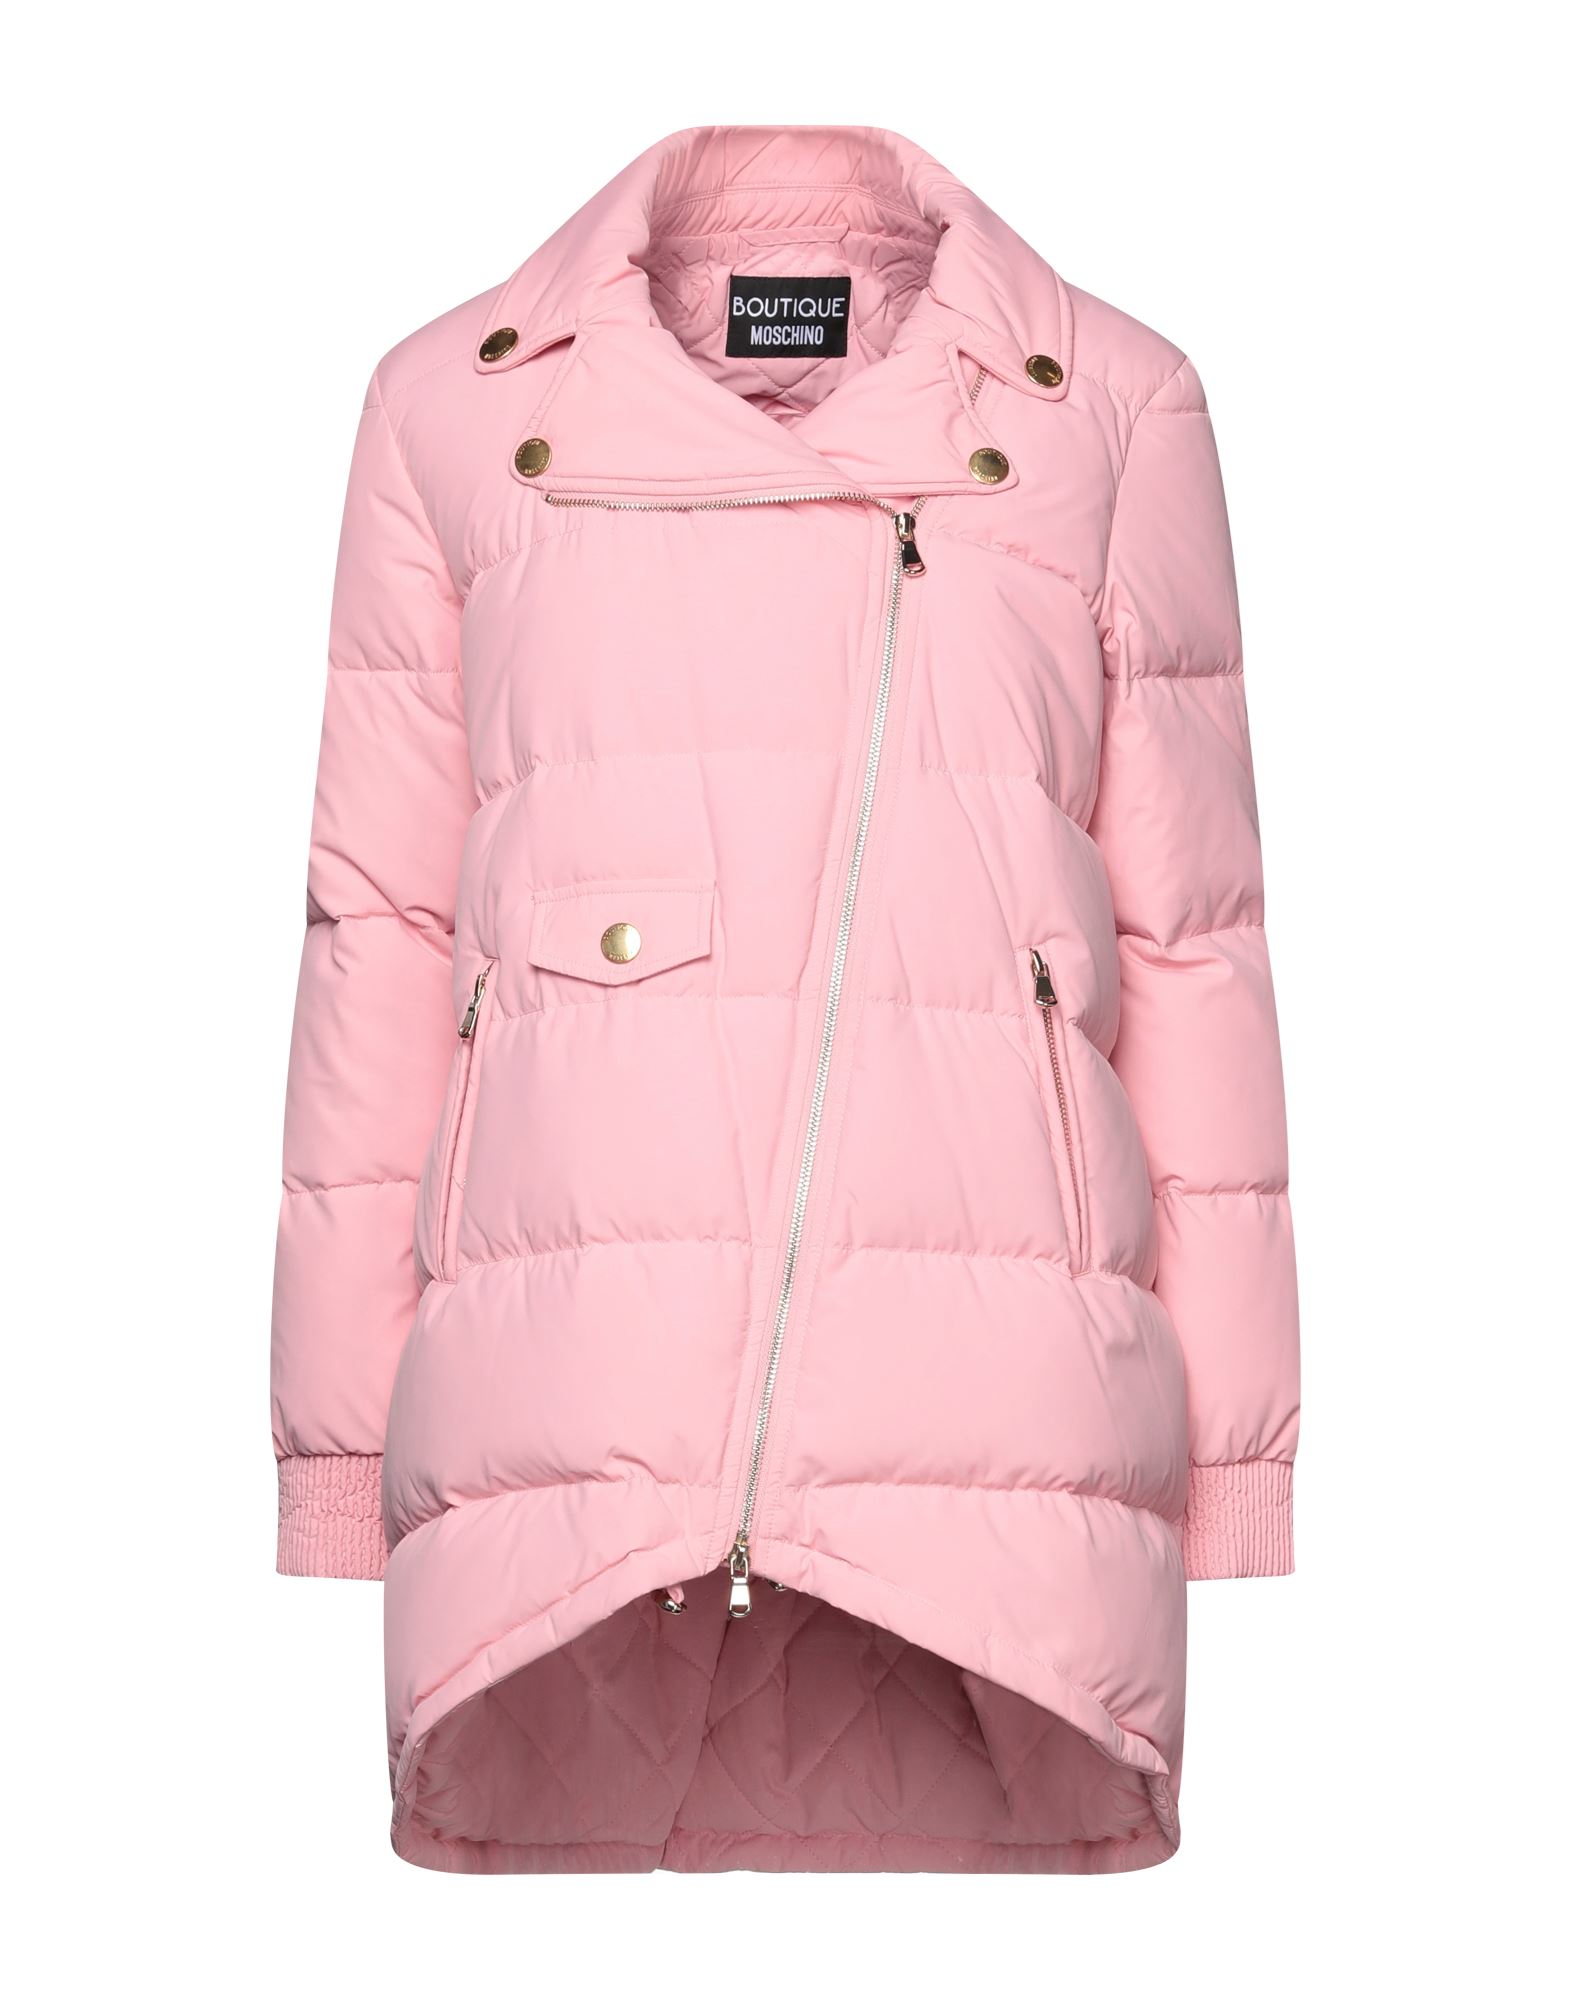 BOUTIQUE MOSCHINO DOWN JACKETS,41949092AN 4